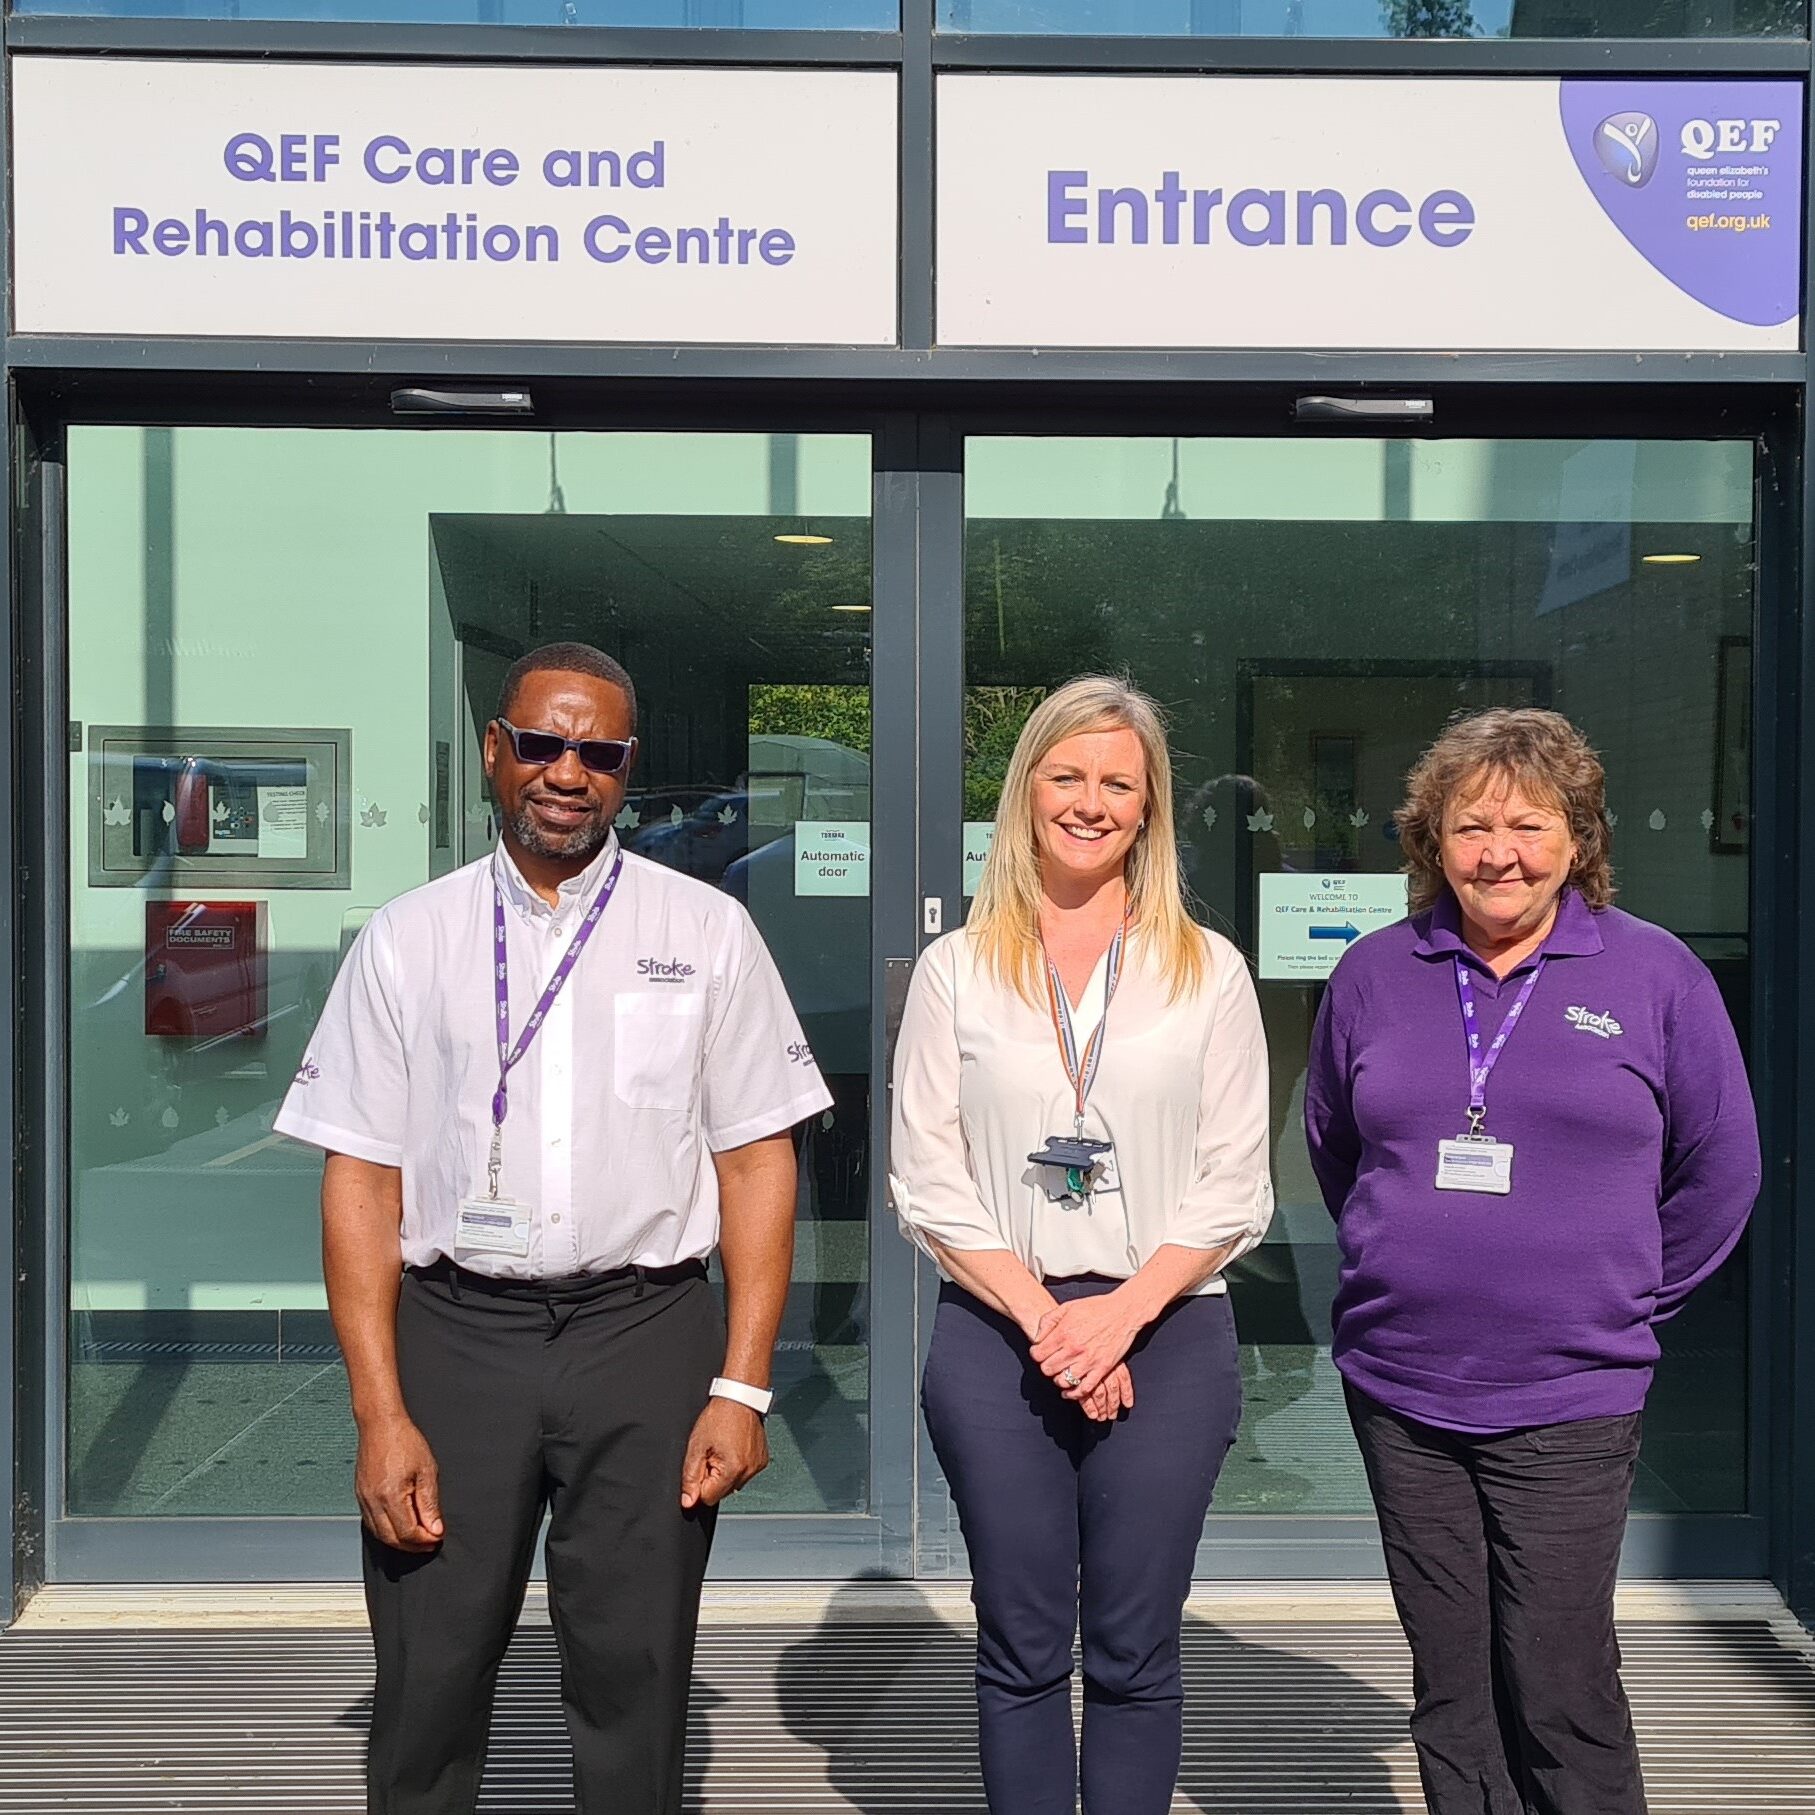 Jenny from QEF with Julie and Arnold from the Stroke Association outside the main entrance to the Care and Rehabilitation Centre